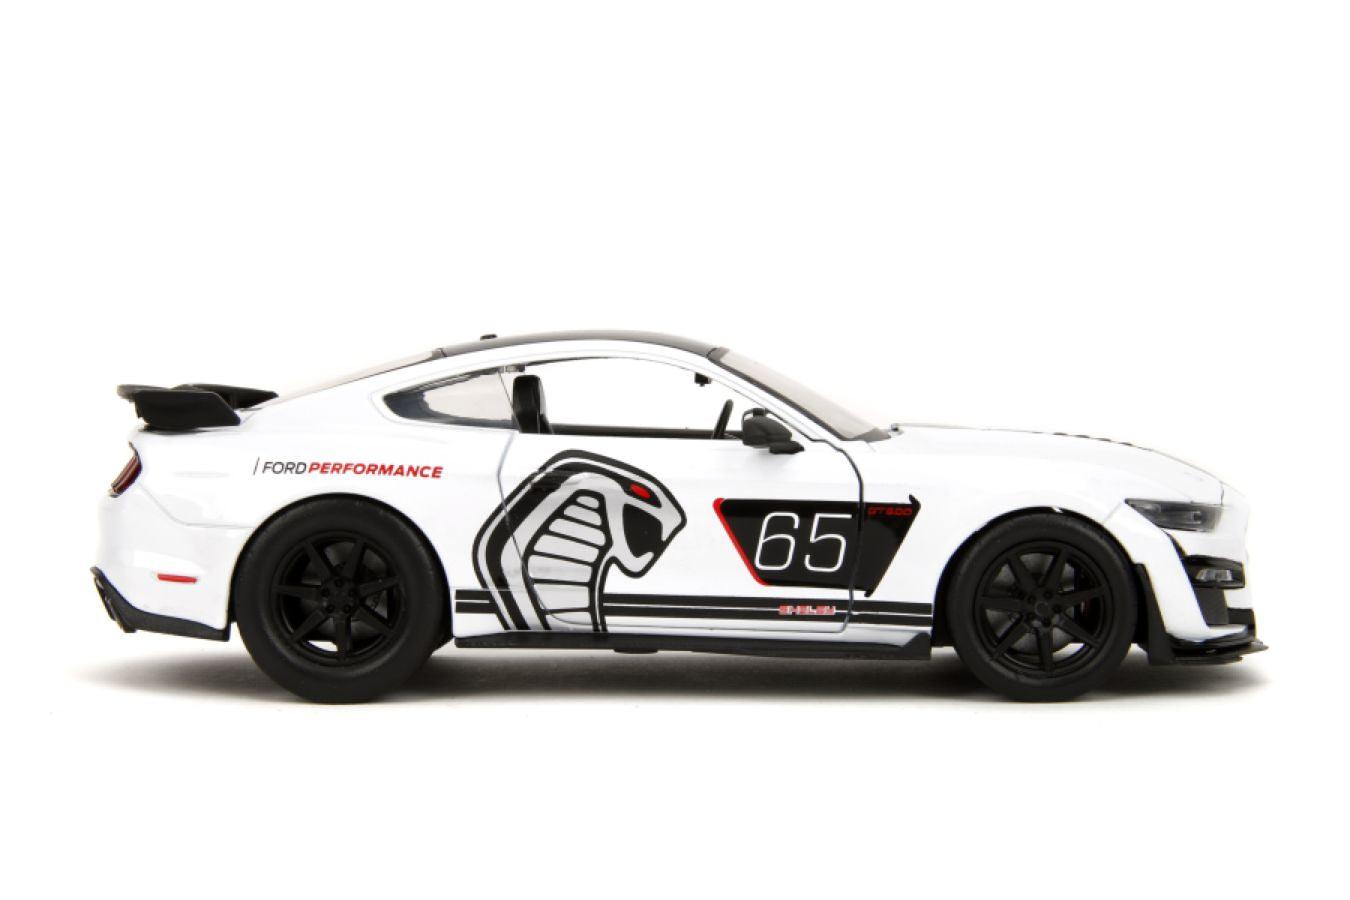 JAD35216 Big Time Muscle: Dark Horse - 2020 Ford Mustang Shelby GT500 1:24 Scale Diecast Vehicle - Jada Toys - Titan Pop Culture